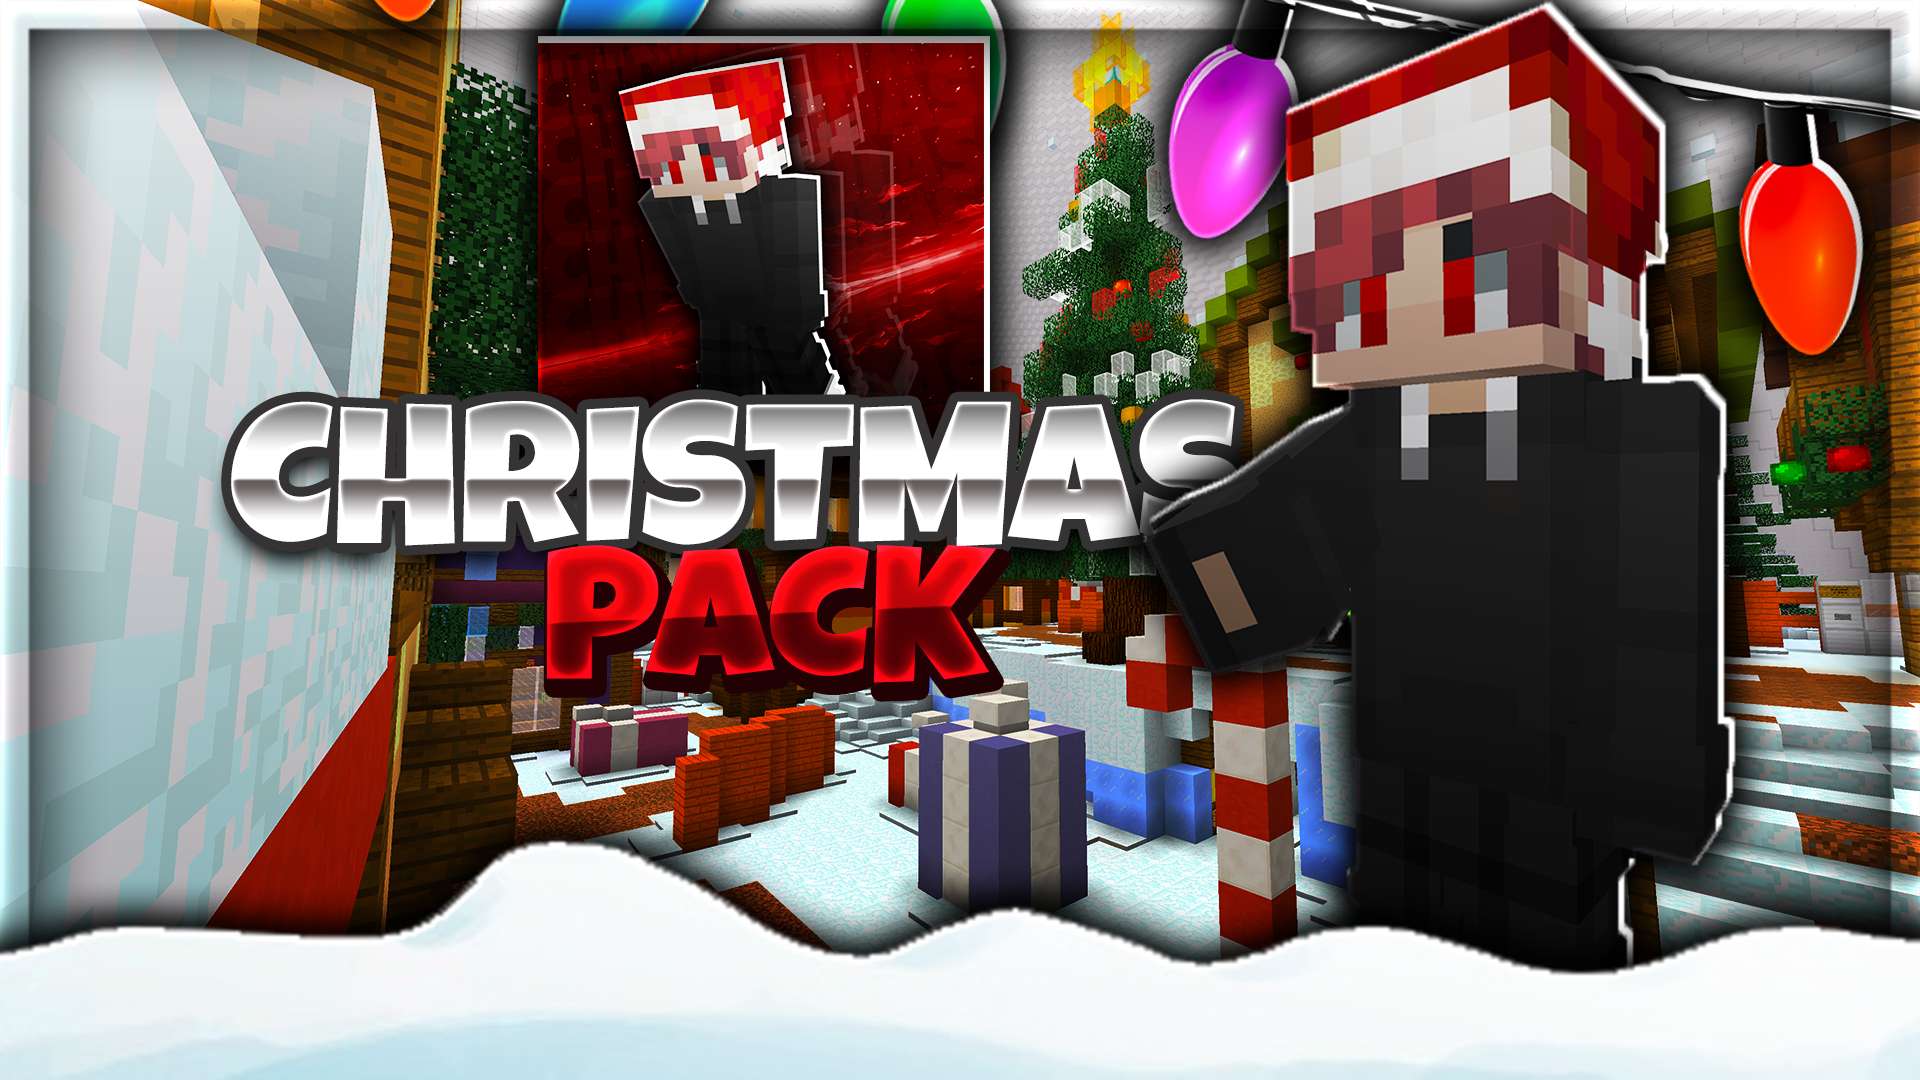 Christmas Pack 16x 16x by BladezzPack on PvPRP